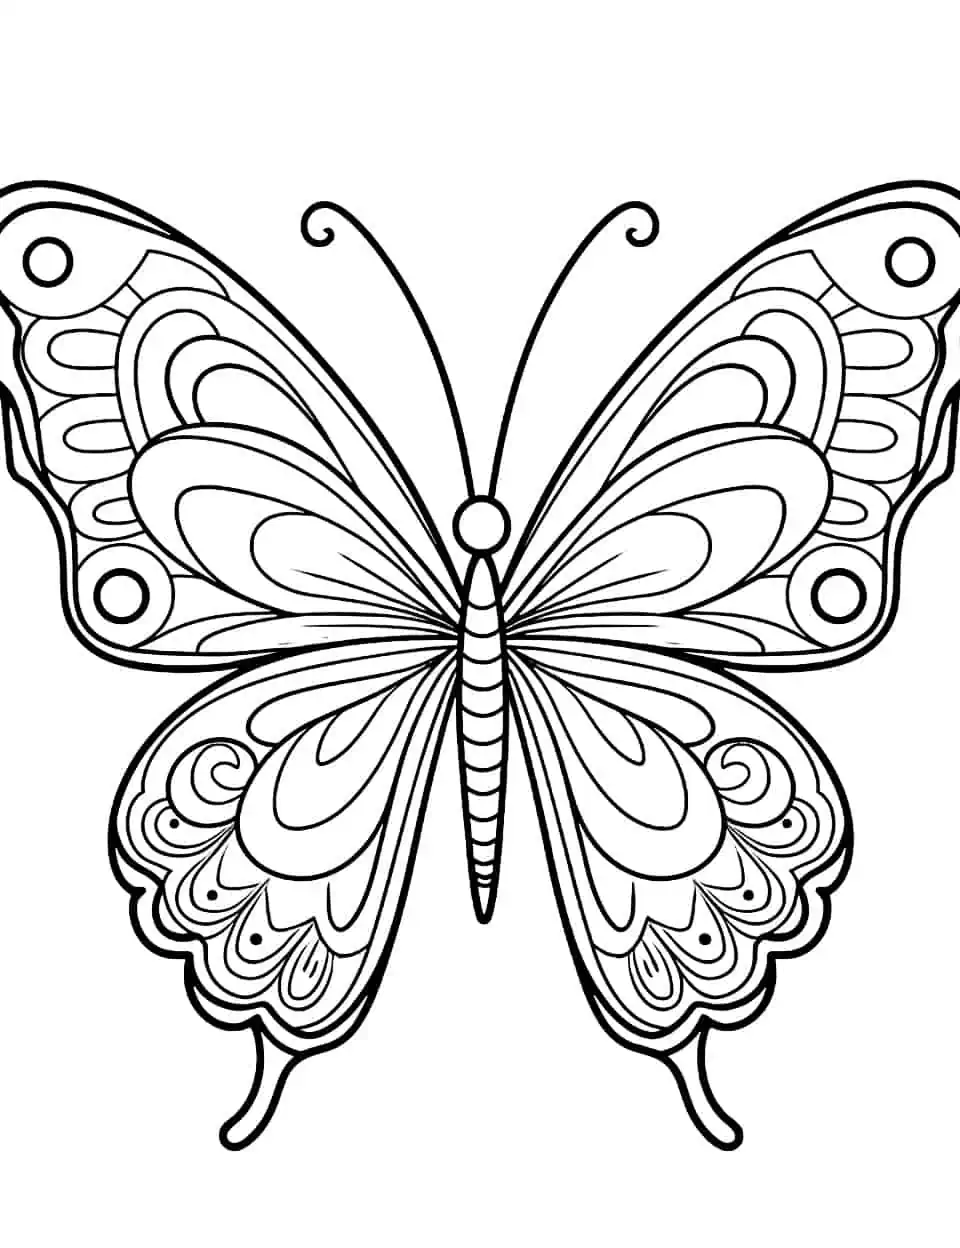 Hidden Patterns Butterfly Coloring Page - A detailed coloring page with a butterfly design incorporating hidden patterns and surprises.